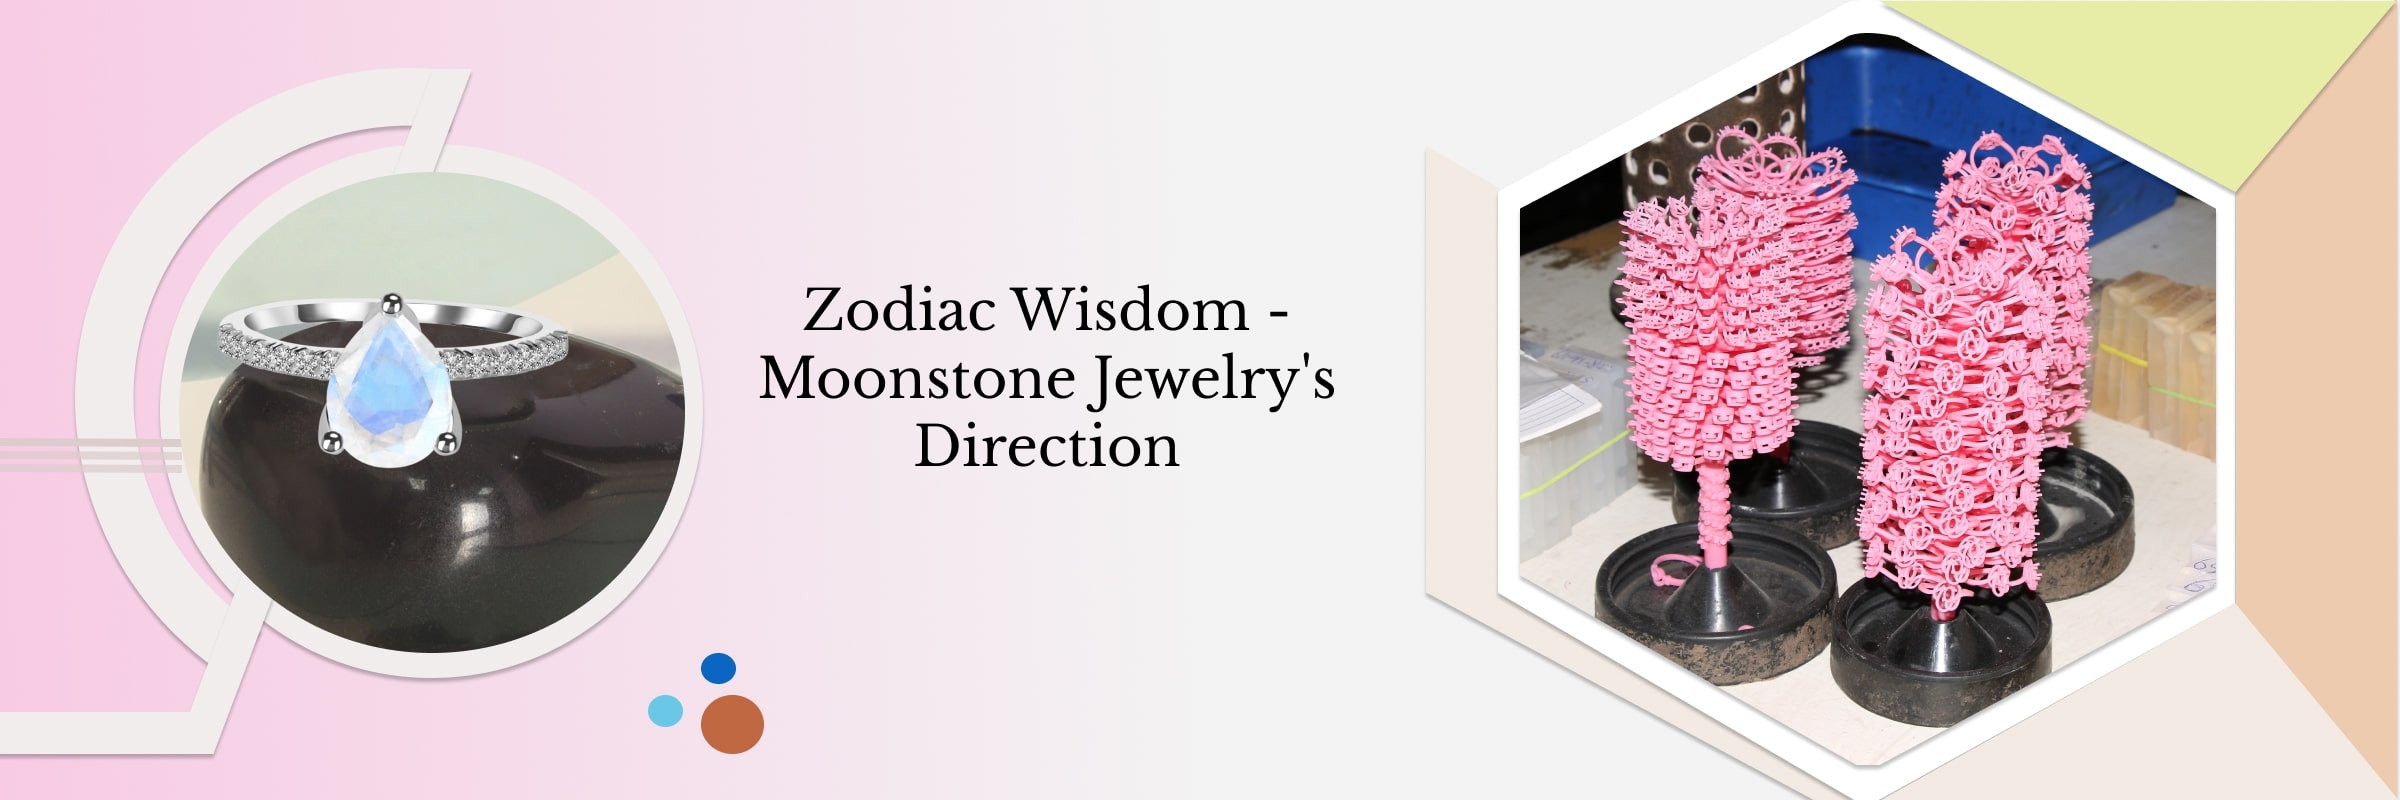 Moonstone Jewelry - Find Purpose and Direction Through the Wisdom of the Zodiac